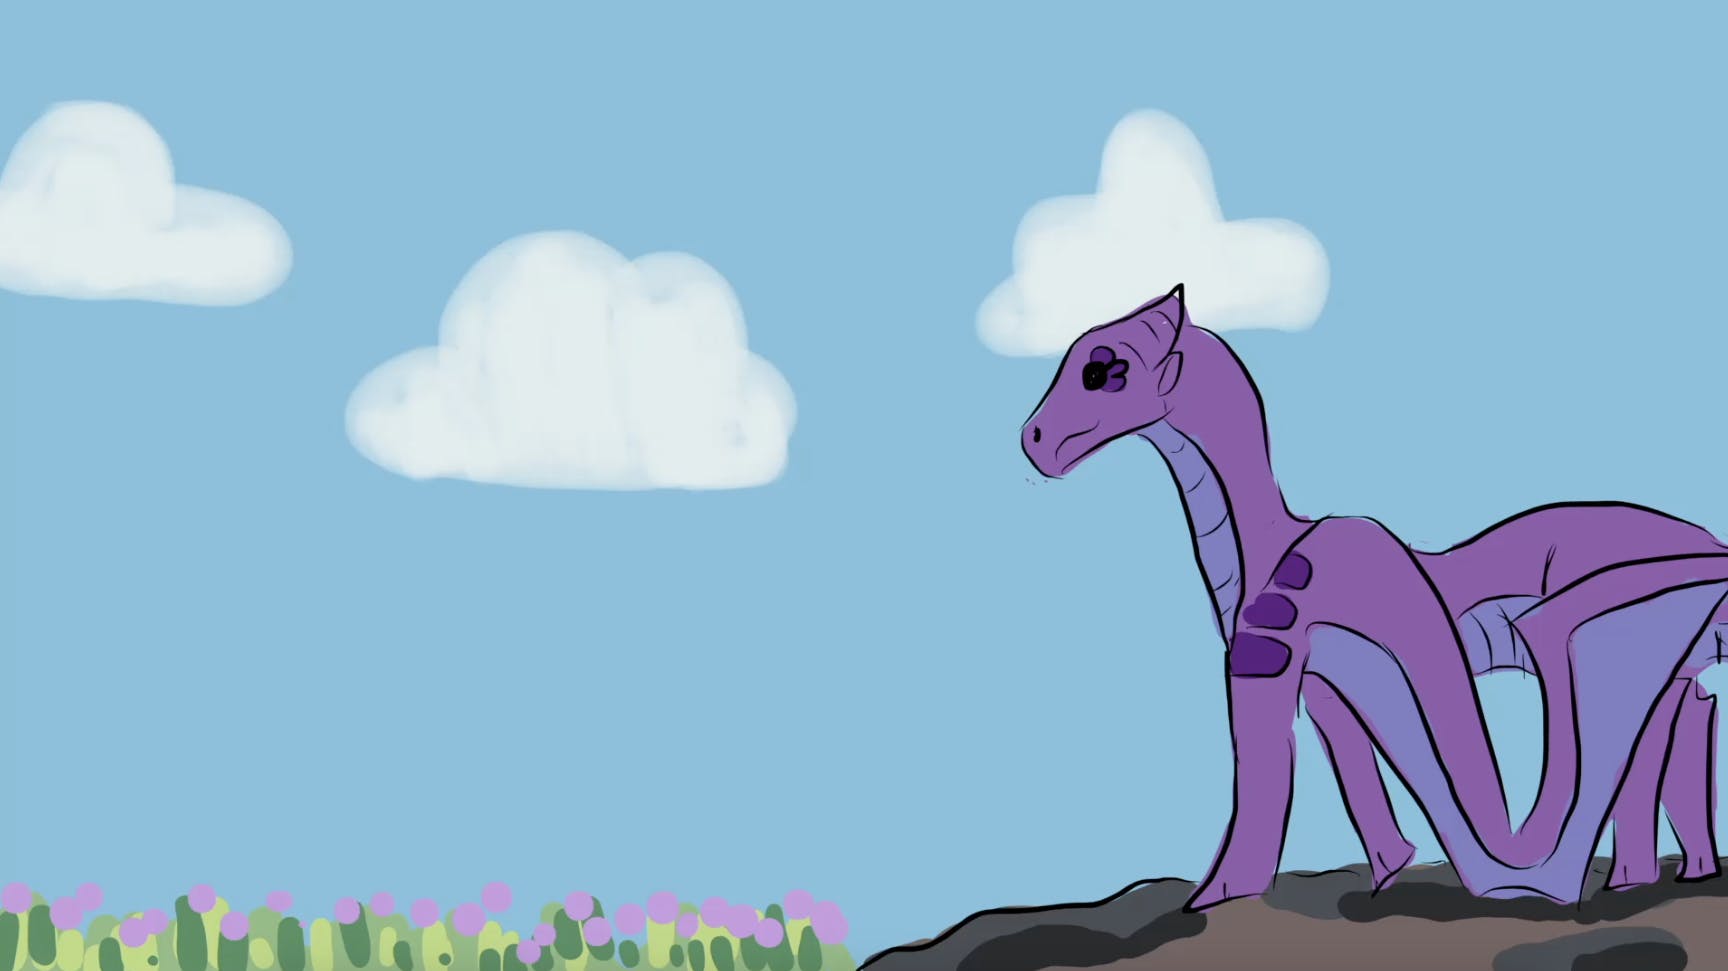 Illustration of a purple dragon on a rock overlooking a meadow